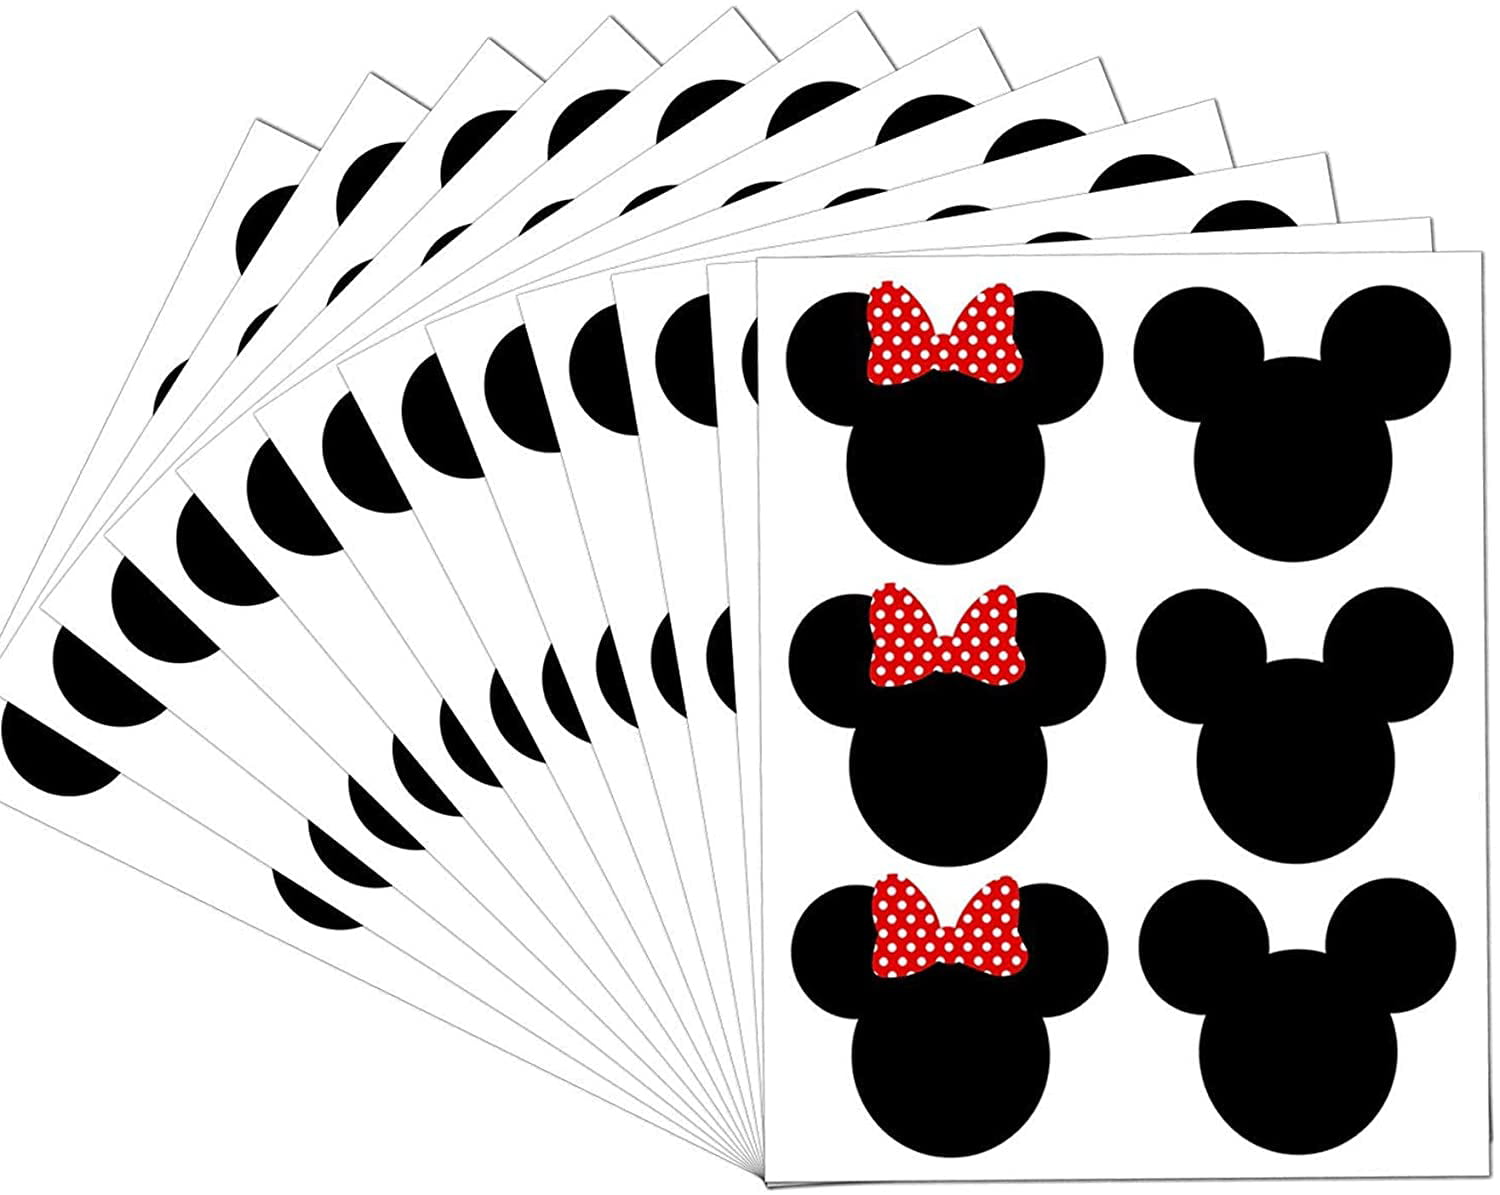 Red Big Mickey a Mouse Head Stickers Chalkboard Labels 2.97 inches x 2.5 inches Large Vinyl Minnie a Mouse Chalk Labels Mickey Minnie a Mouse Ear Blackboard Stickers 90 Pack 